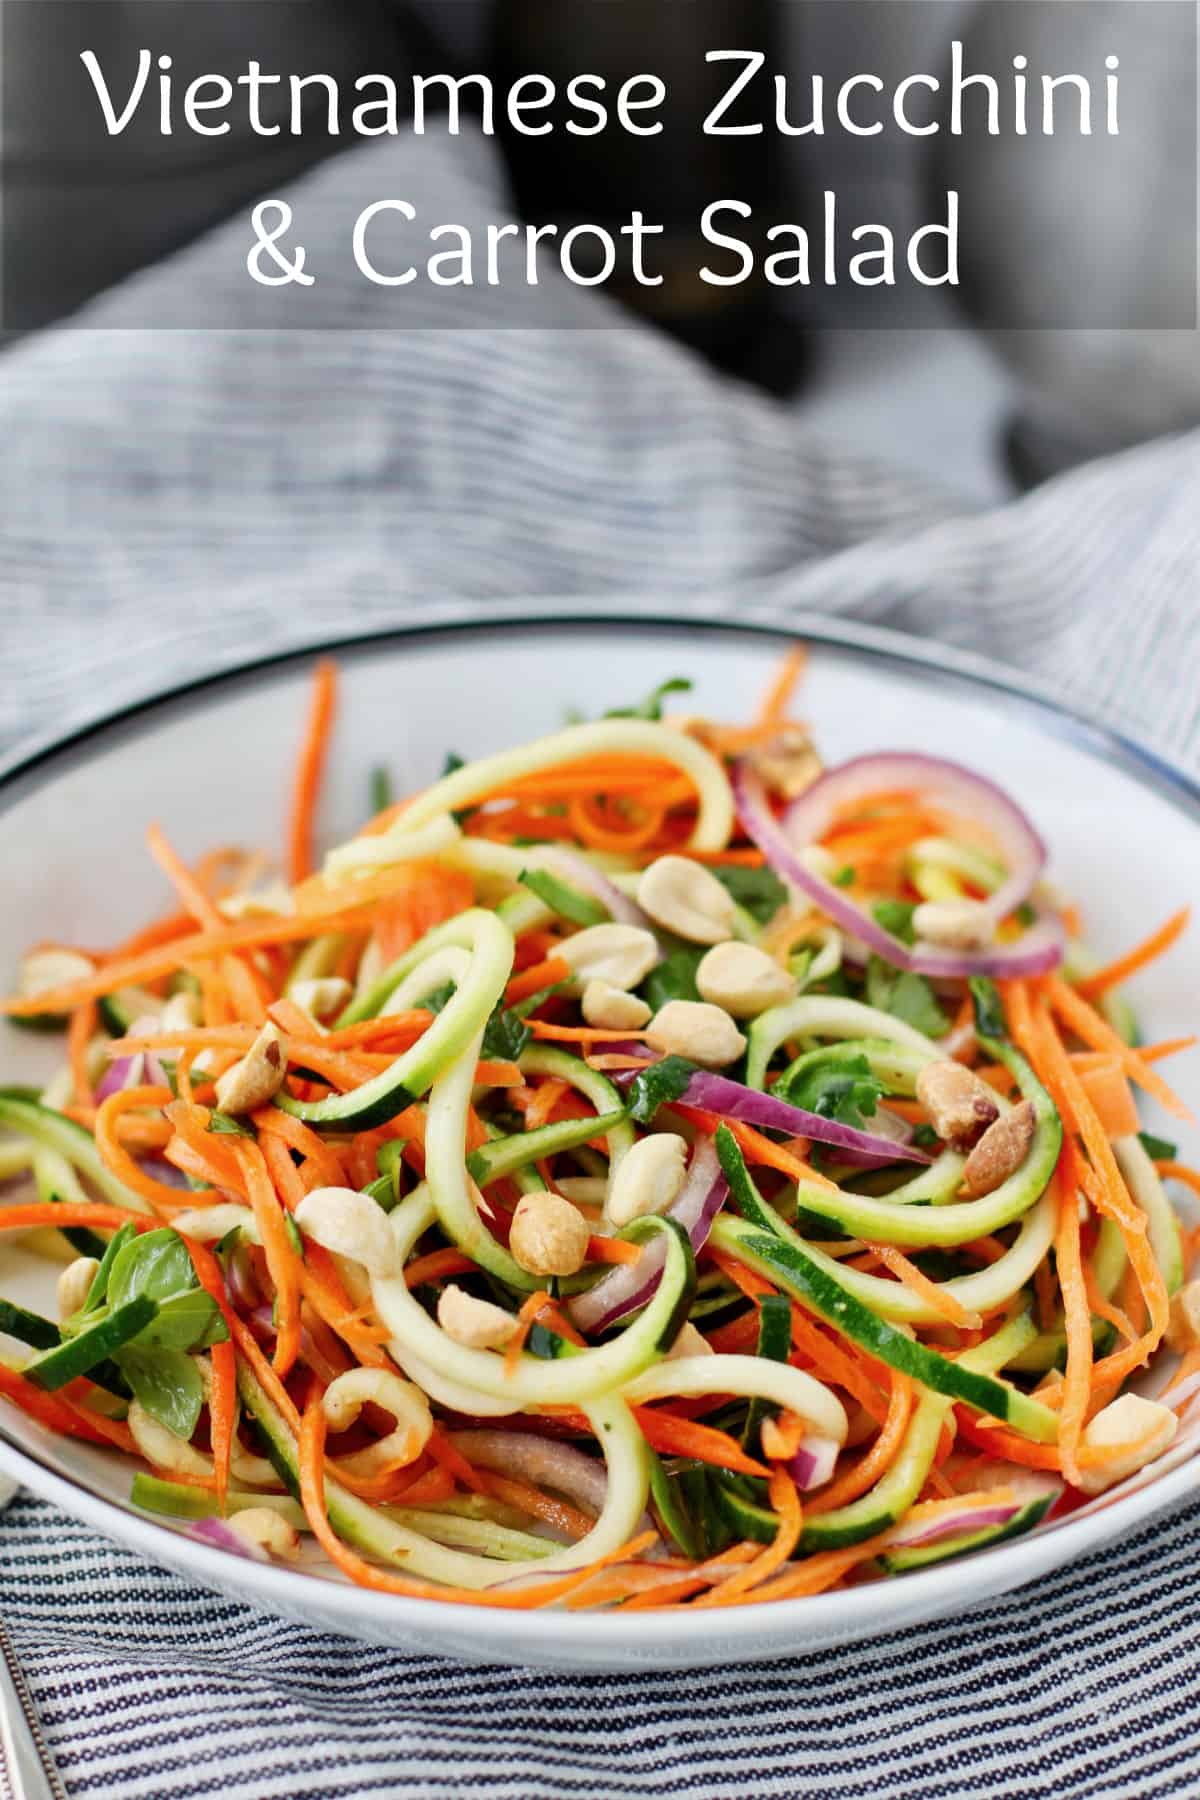 Vietnamese Zucchini and Carrot Salad with Peanuts in a bowl.